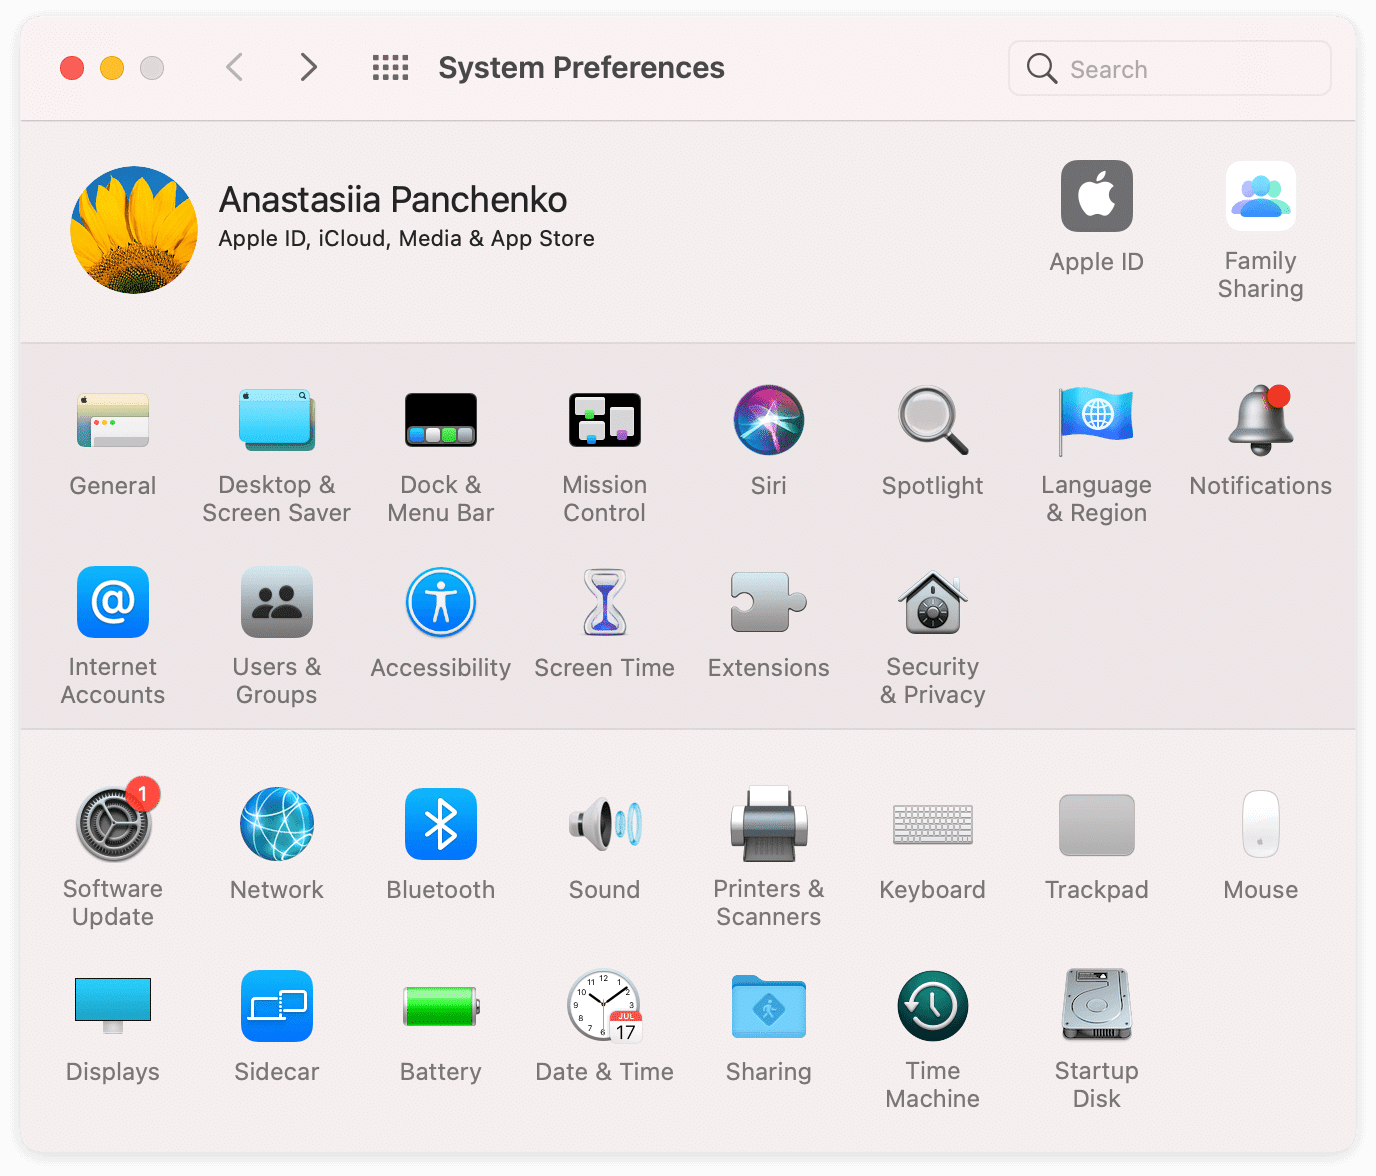 The System preferences panel